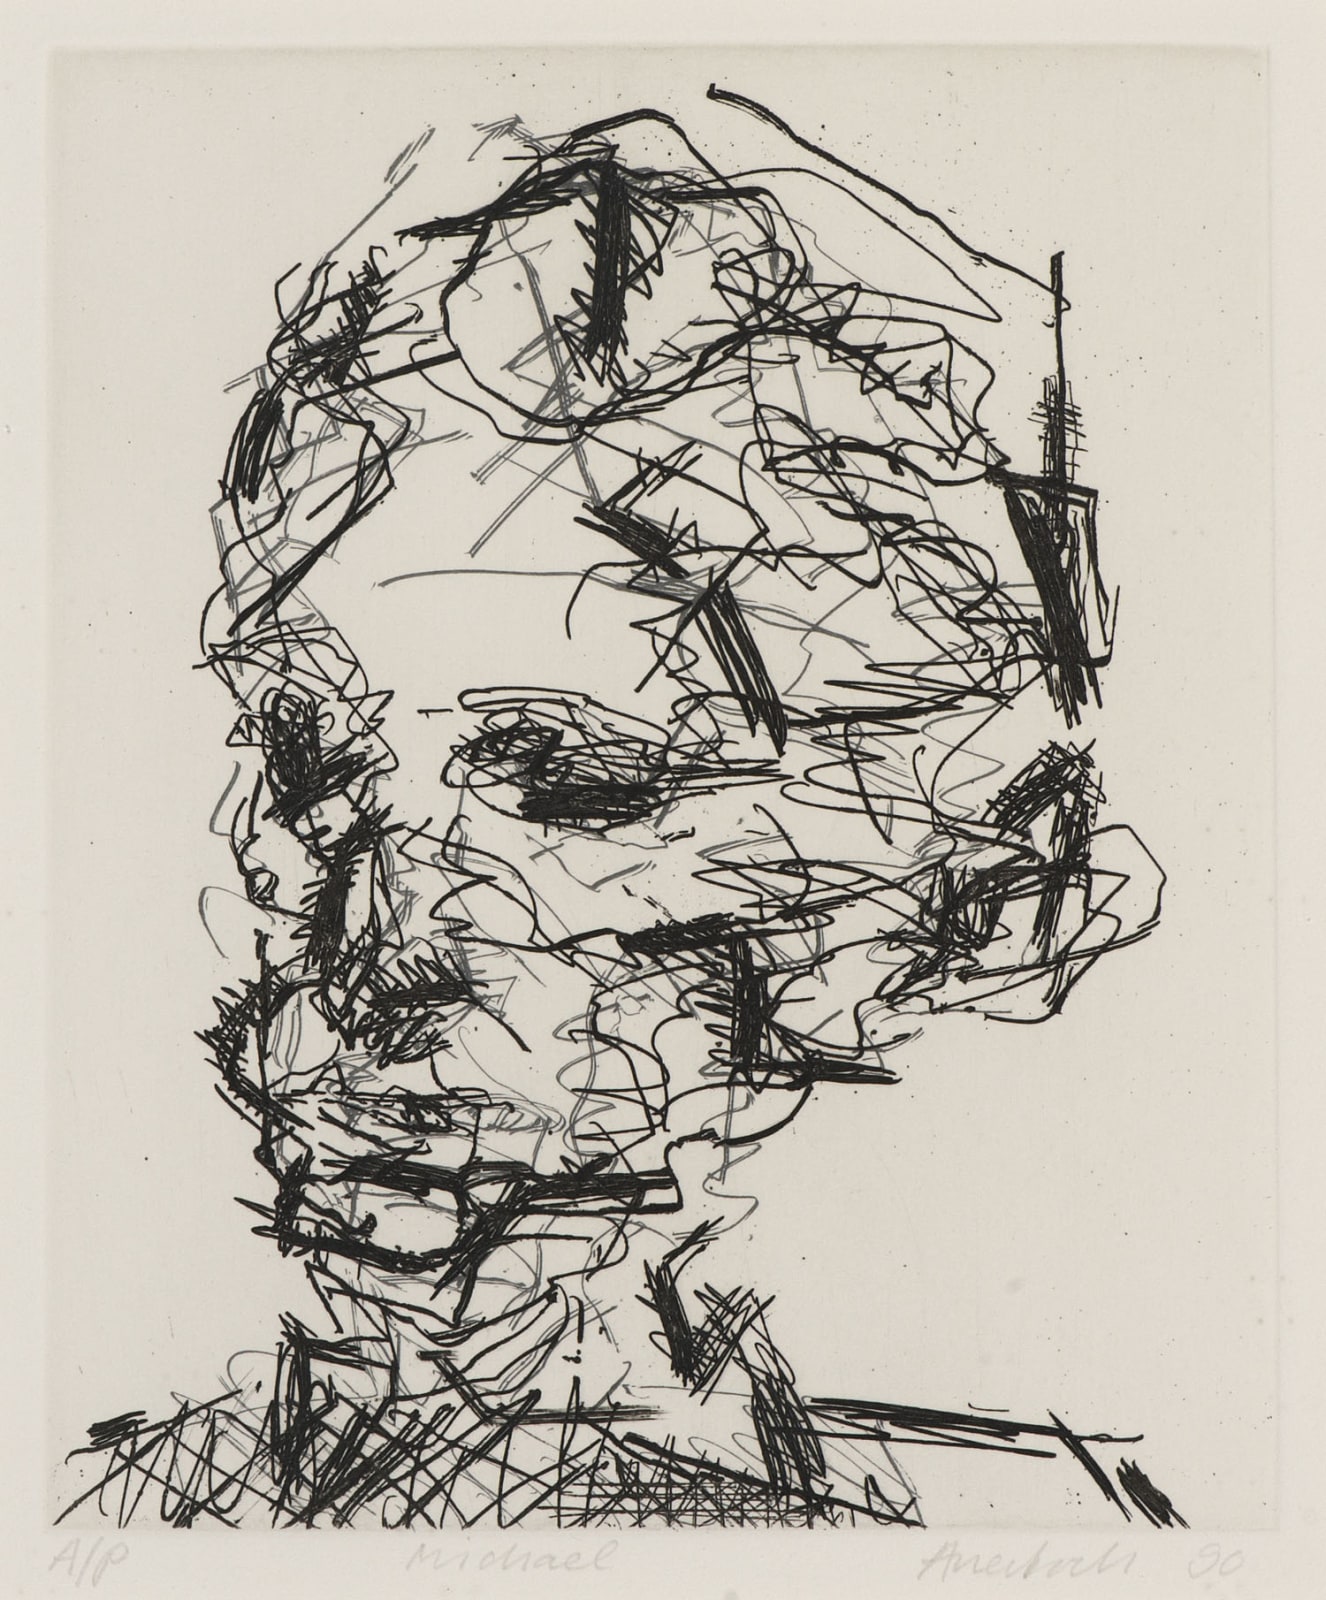 Frank Auerbach (1931-) Michael 1990 Etching, printed on Somerset white paper, artist's proof outside the published edition of 50 20 x 16.5 cm Ben Ury Collection © Frank Auerbach, courtesy Marlborough Fine Art